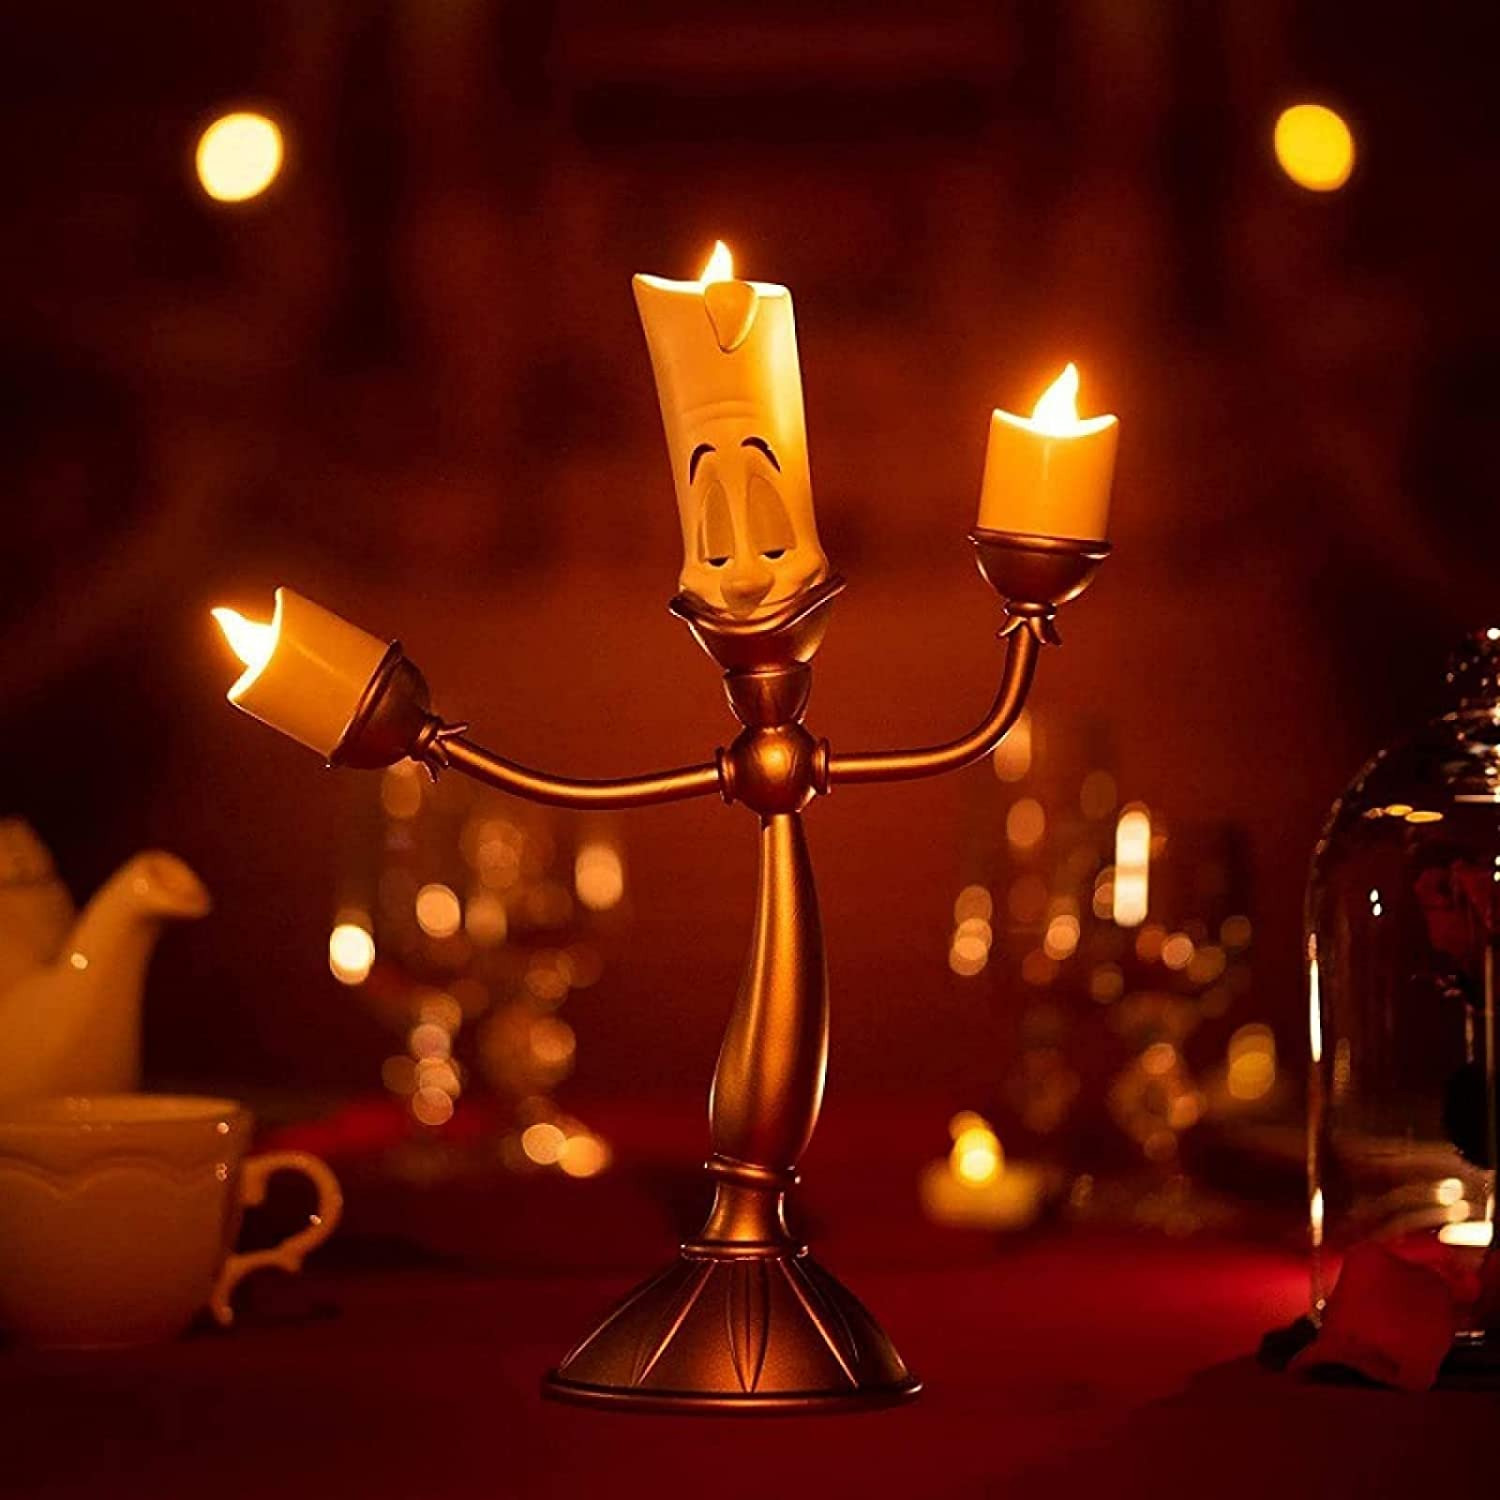 Beauty and The Beast Lumiere Candelabra Lamp Lumiere Light Up Figure Candlestick